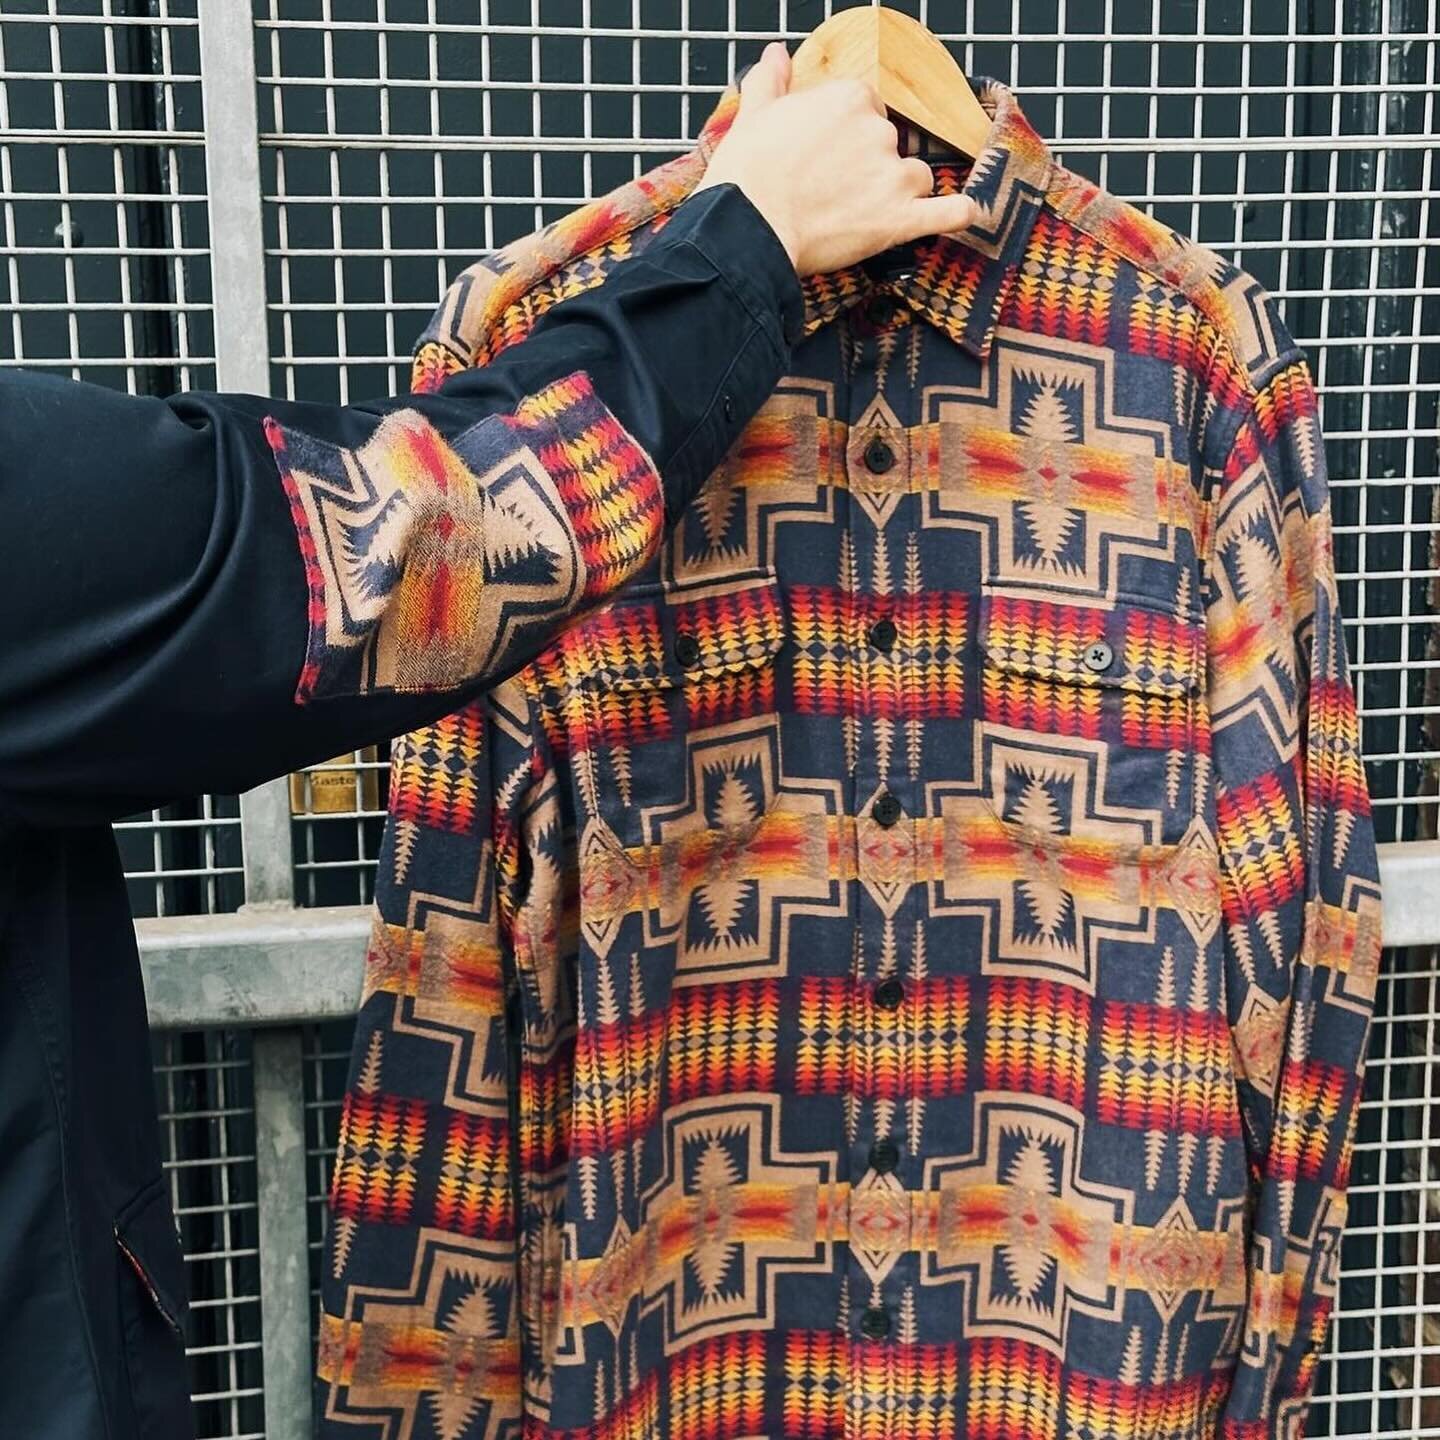 Our first special collection with @pendletonwm is now available exclusively in Europe. The Harding Capsule takes Pendleton&rsquo;s iconic pattern and brings it across a multitude of every day wear&hellip; #pendleton